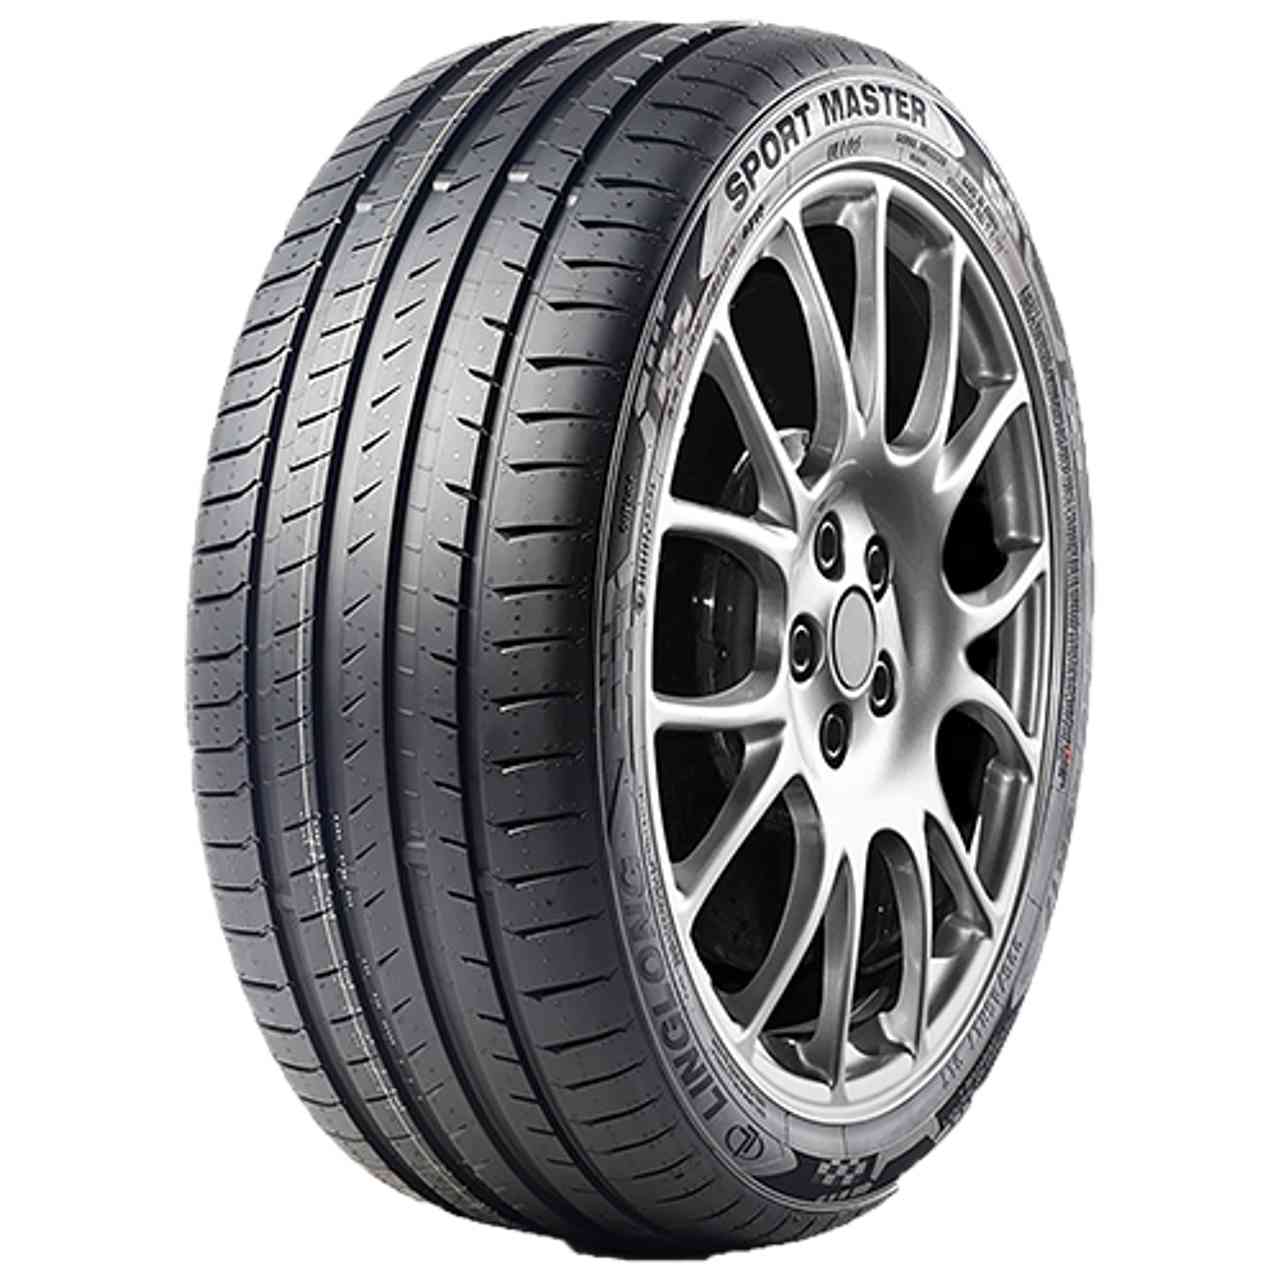 LINGLONG SPORT MASTER 205/55R16 94Y BSW